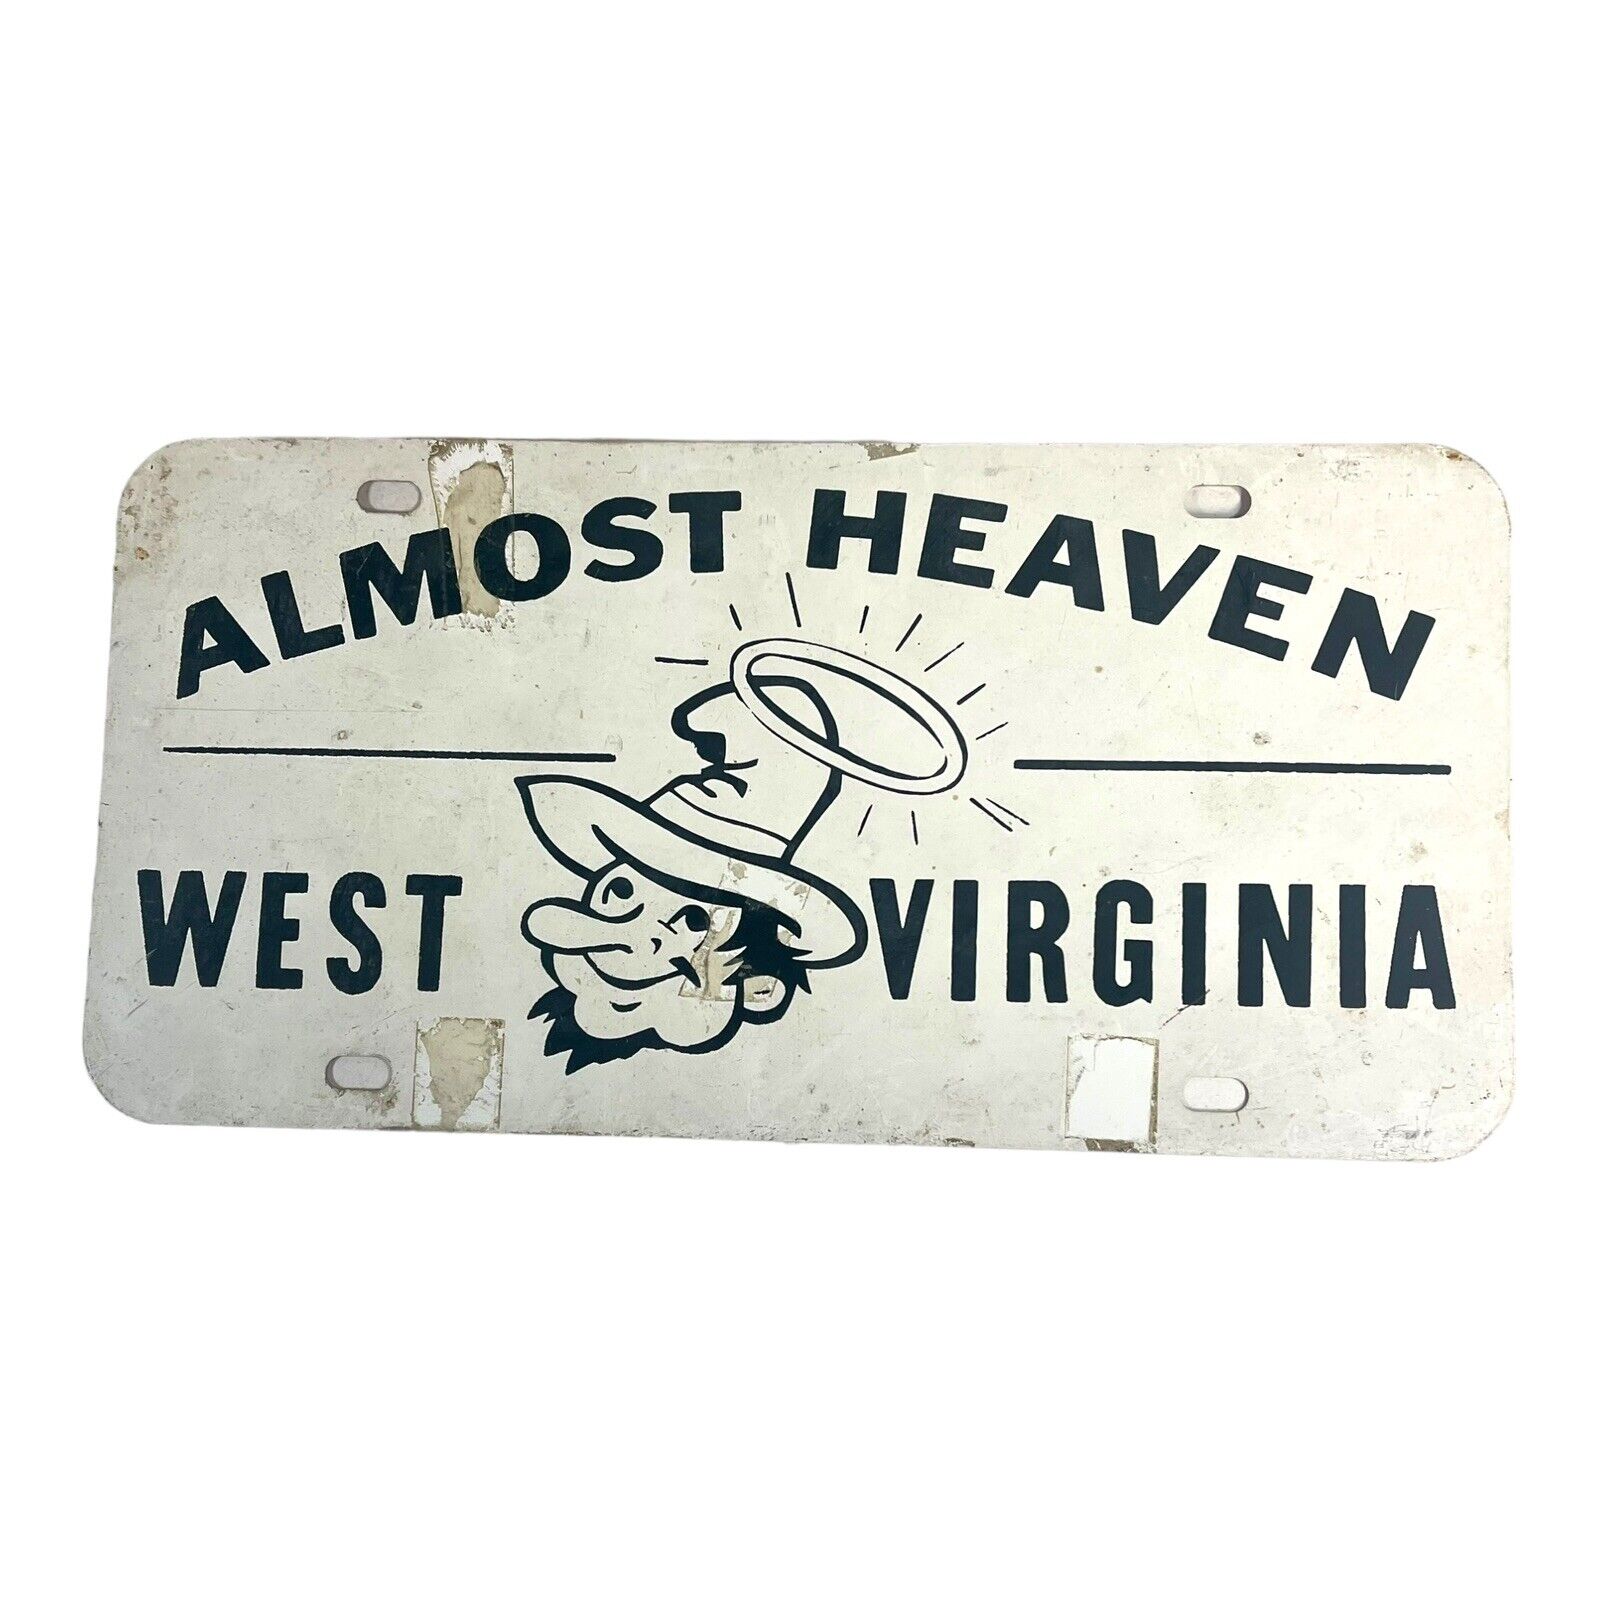 1960s Almost Heaven West Virginia License Plate Booster License Heavy Metal VTG